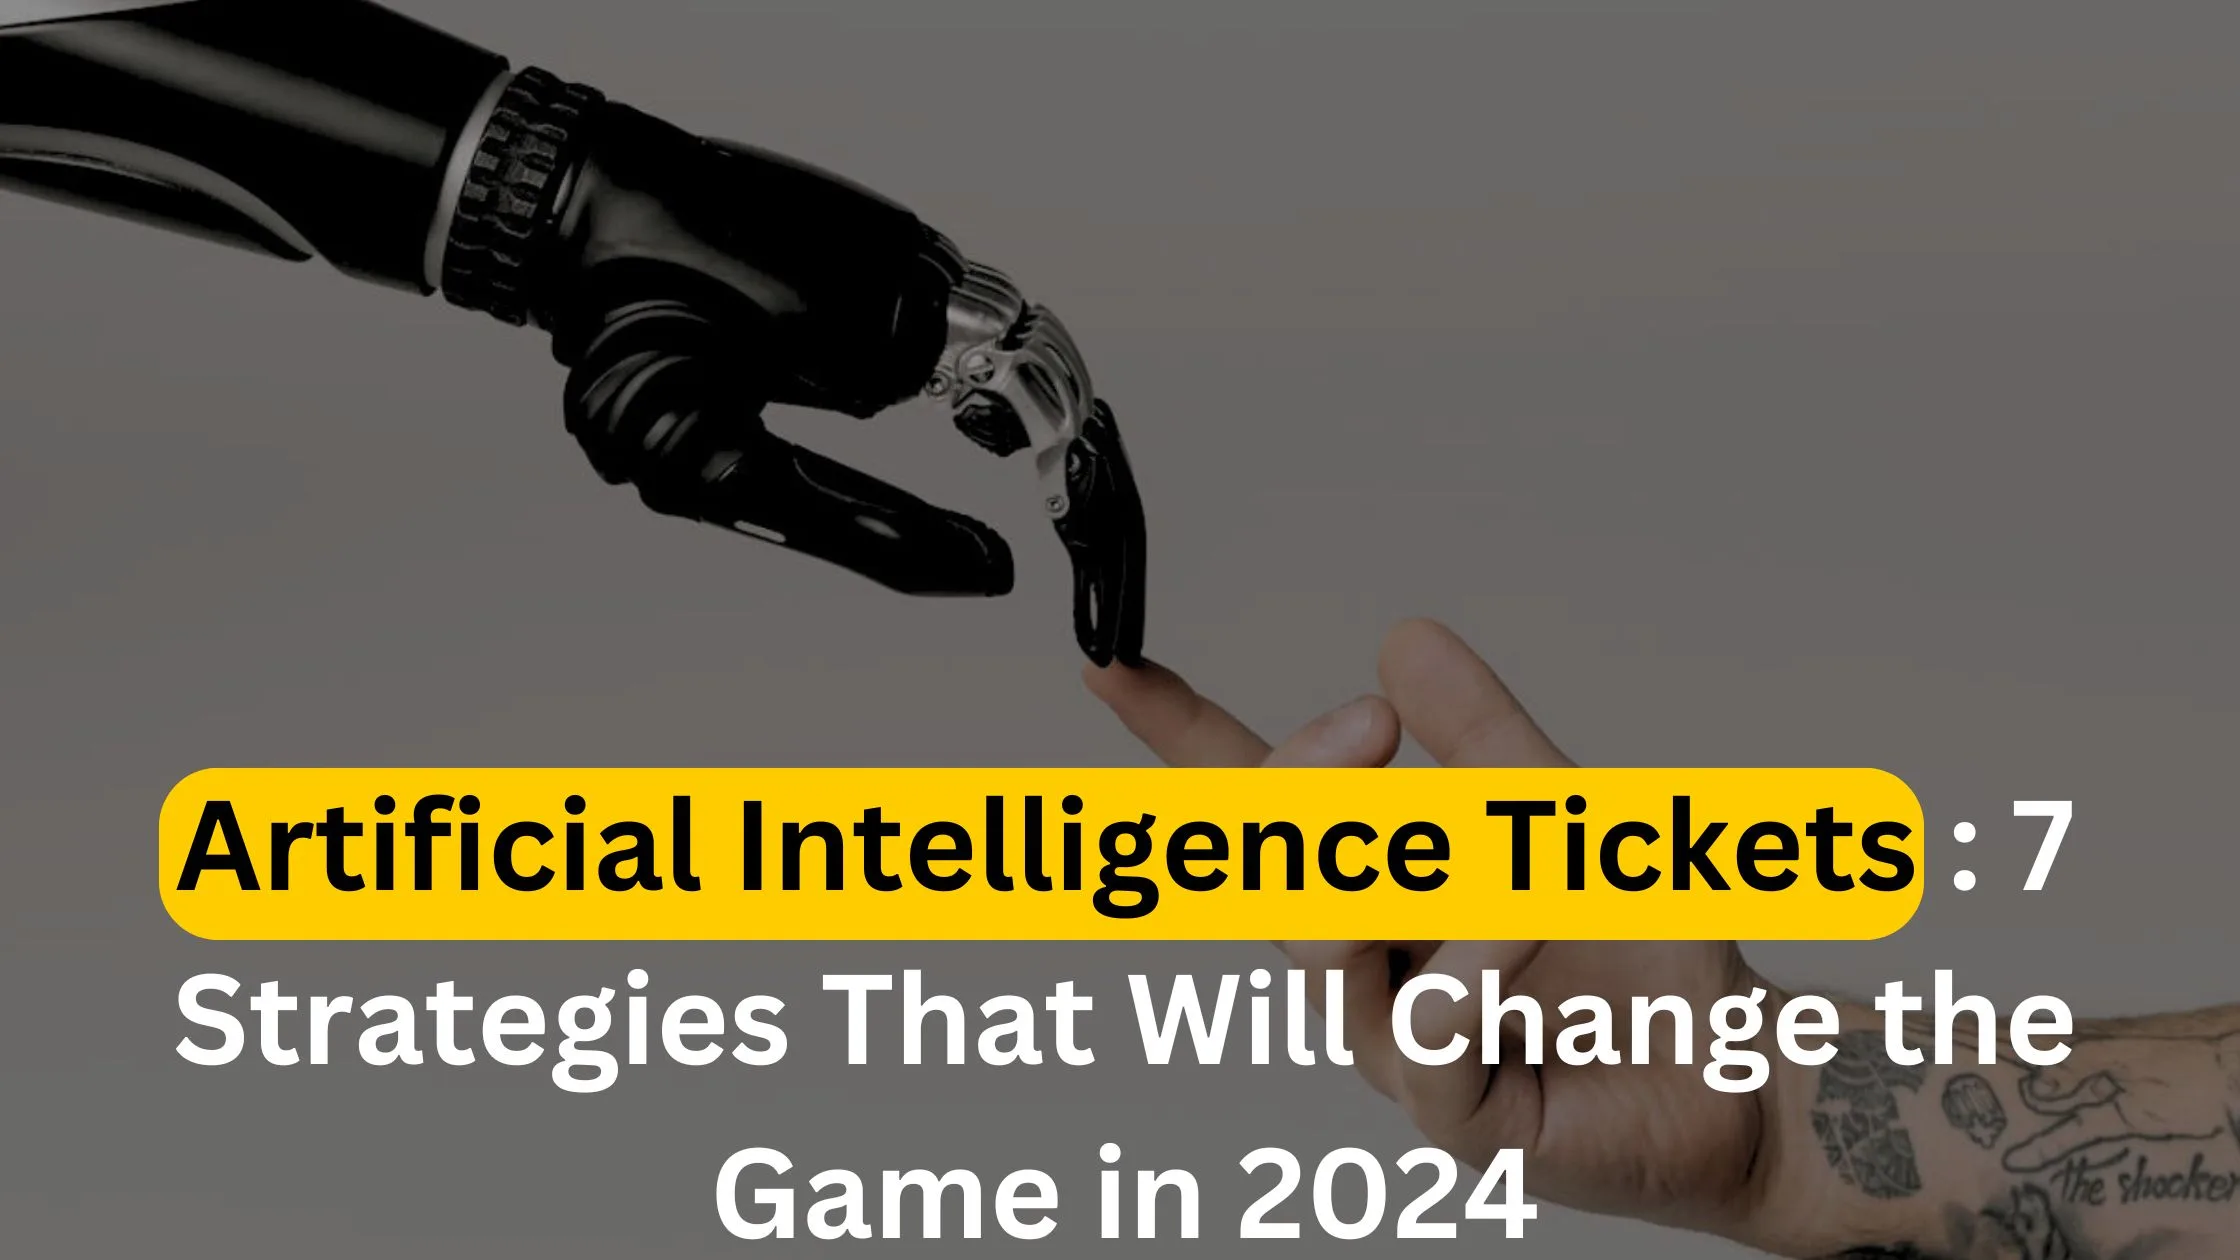 Artificial Intelligence Tickets: 7 Strategies That Will Change the Game in 2024